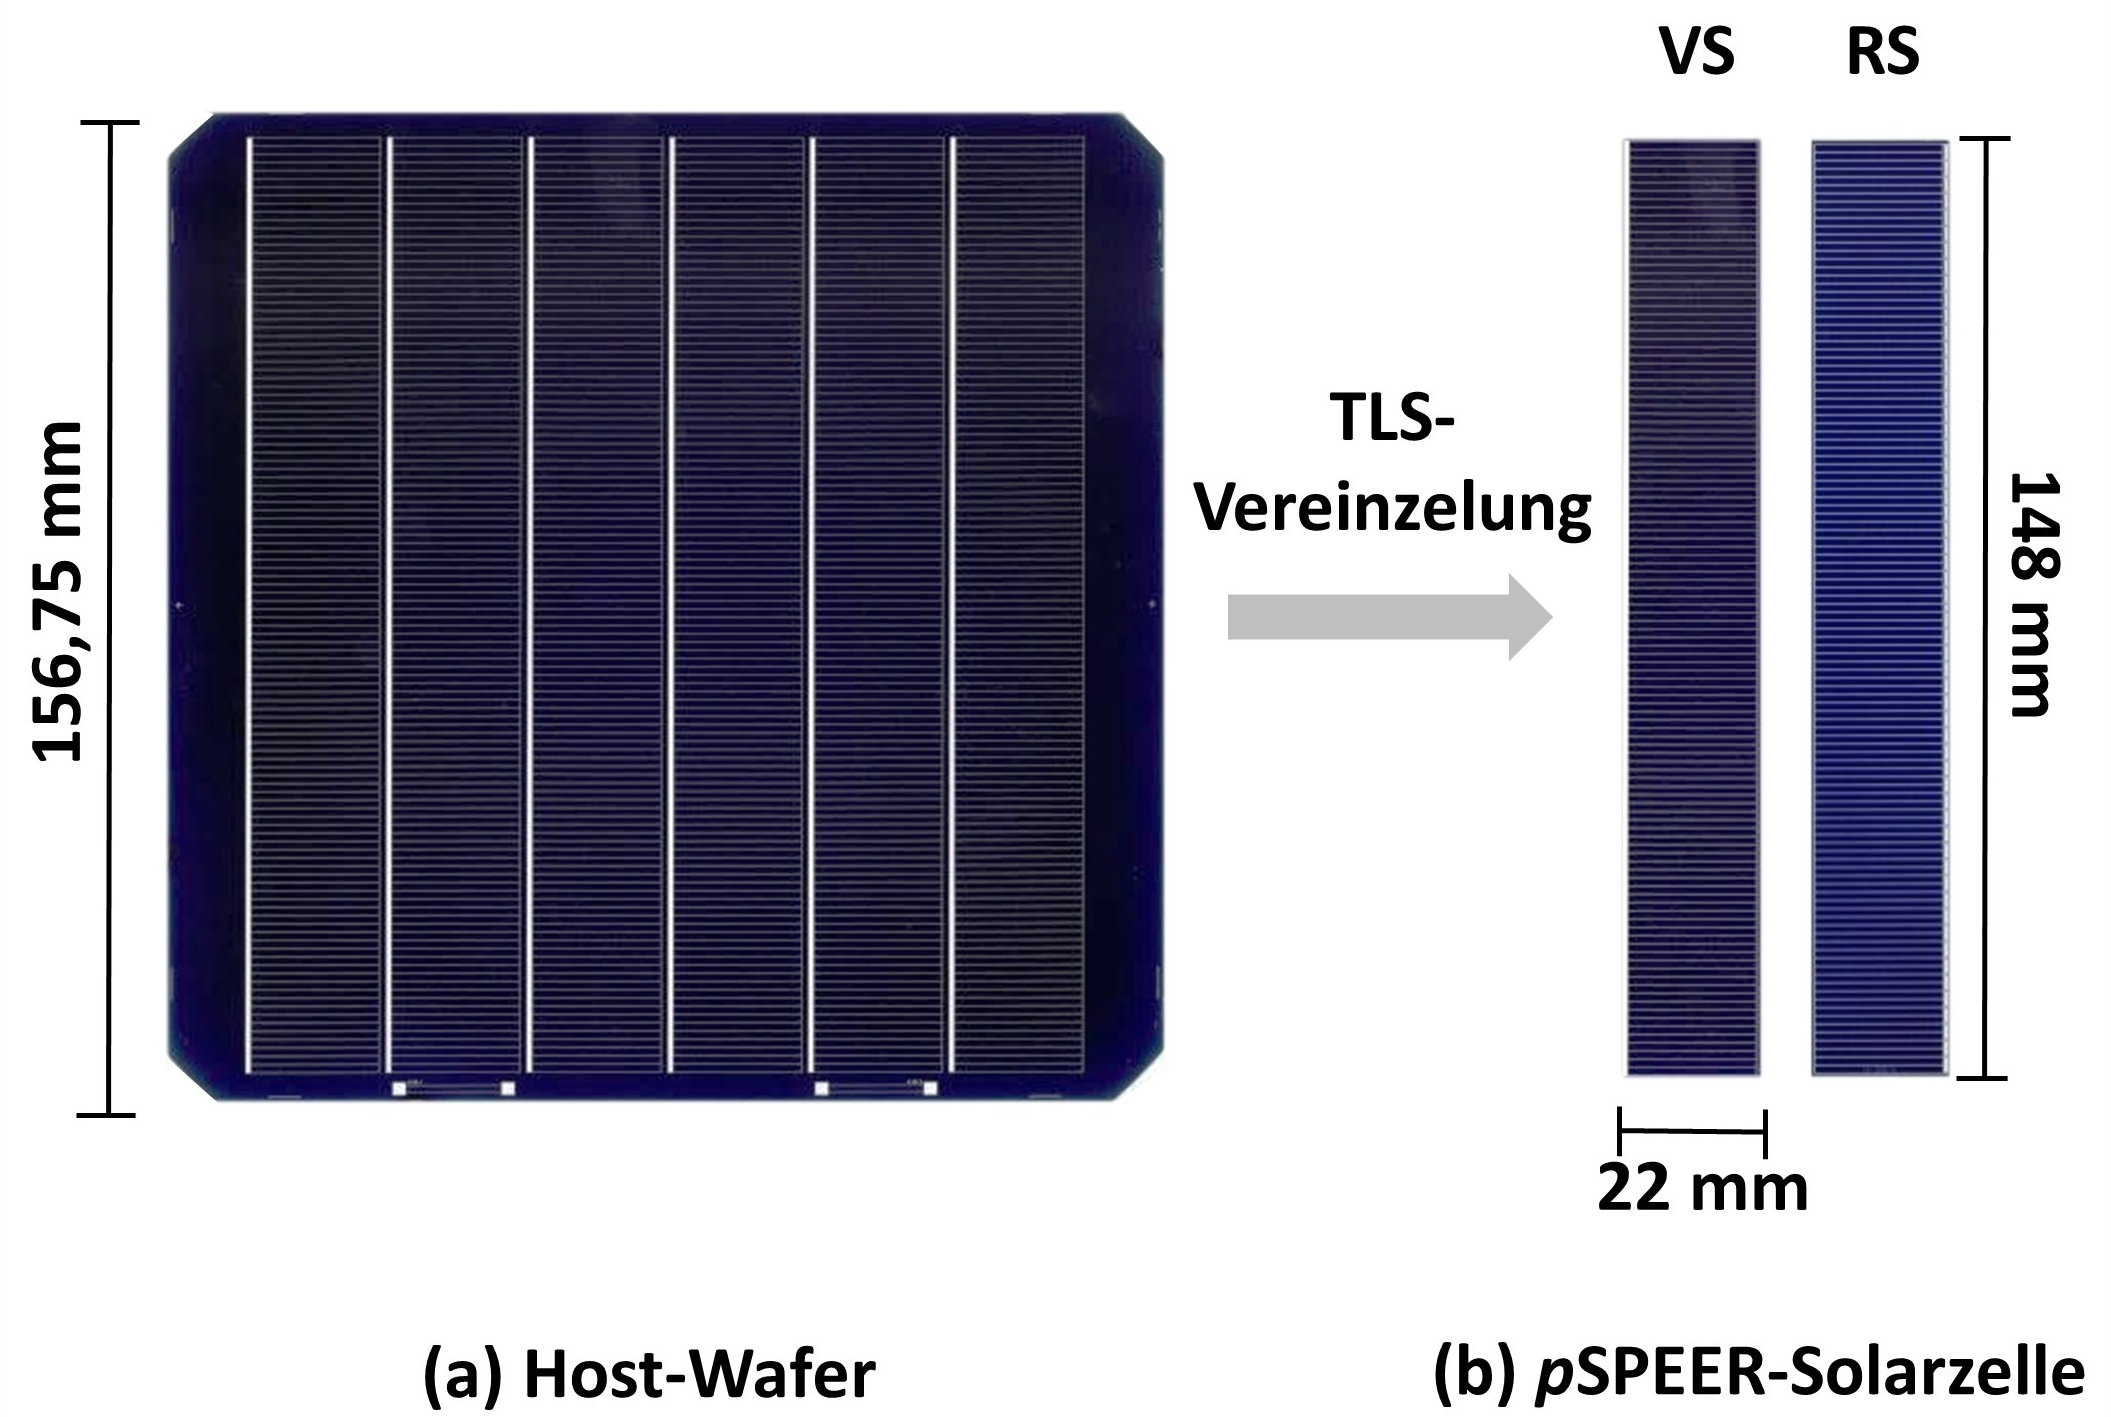 Scans of (a) a metallized 6-inch host wafer with metallization layout by means of which six shingle cells can be separated and (b) a separated pSPEER solar cell after TLS separation with the dimensions 22 mm × 148 mm (VS: front side; RS: back side).